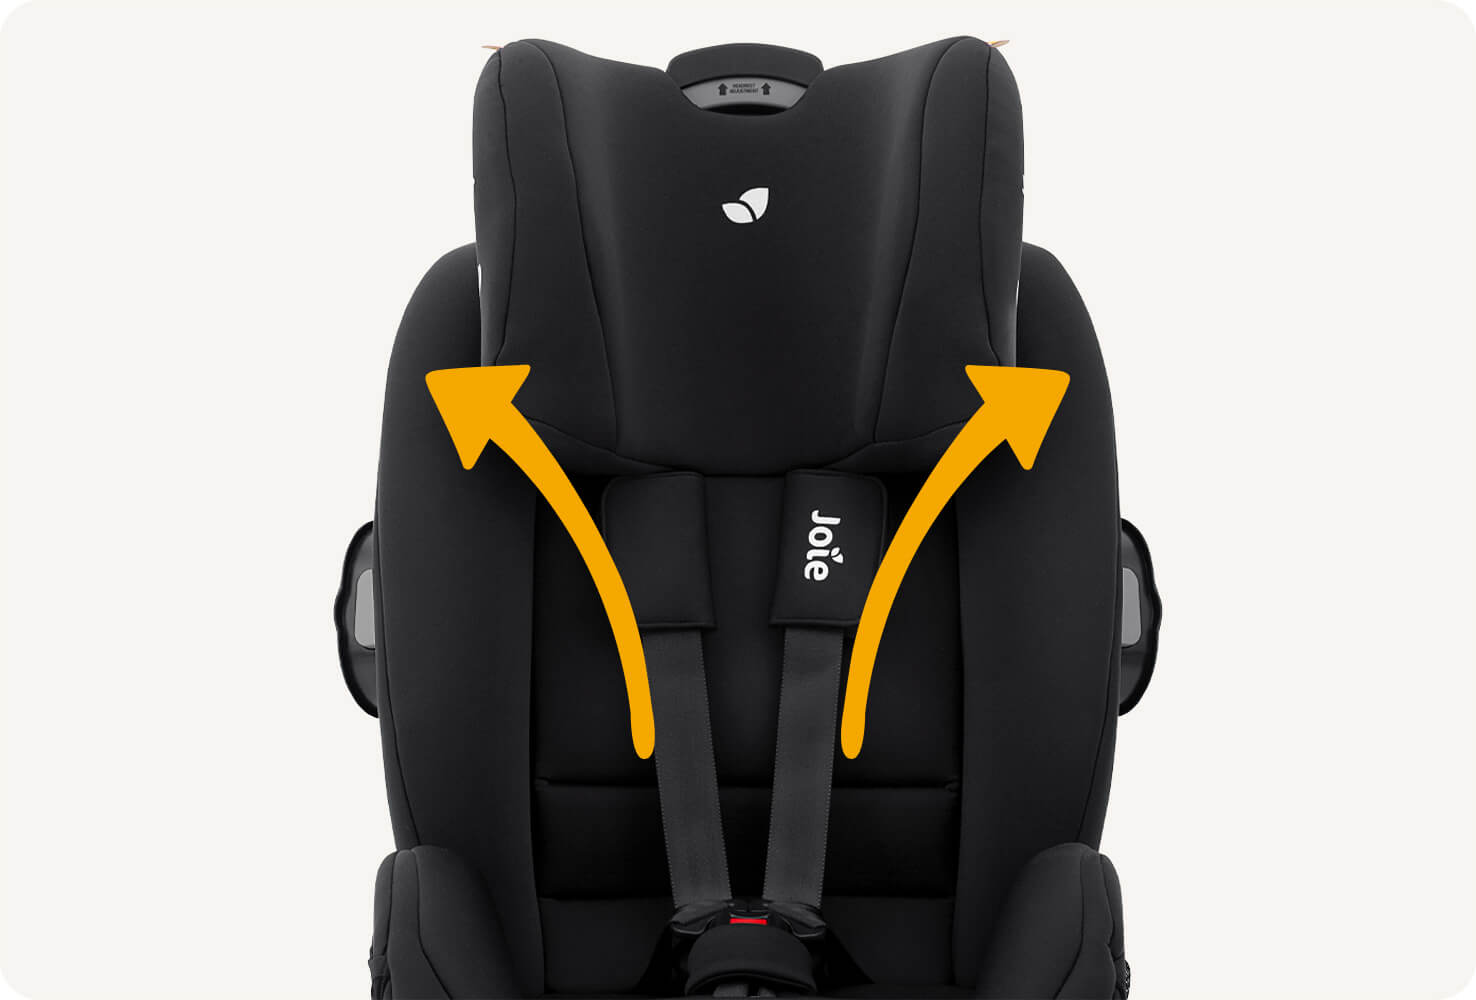  Zoomed in view of Joie armour car seat in black from the front view with arrows pointing up and out to show the headrest lifts to different positions.